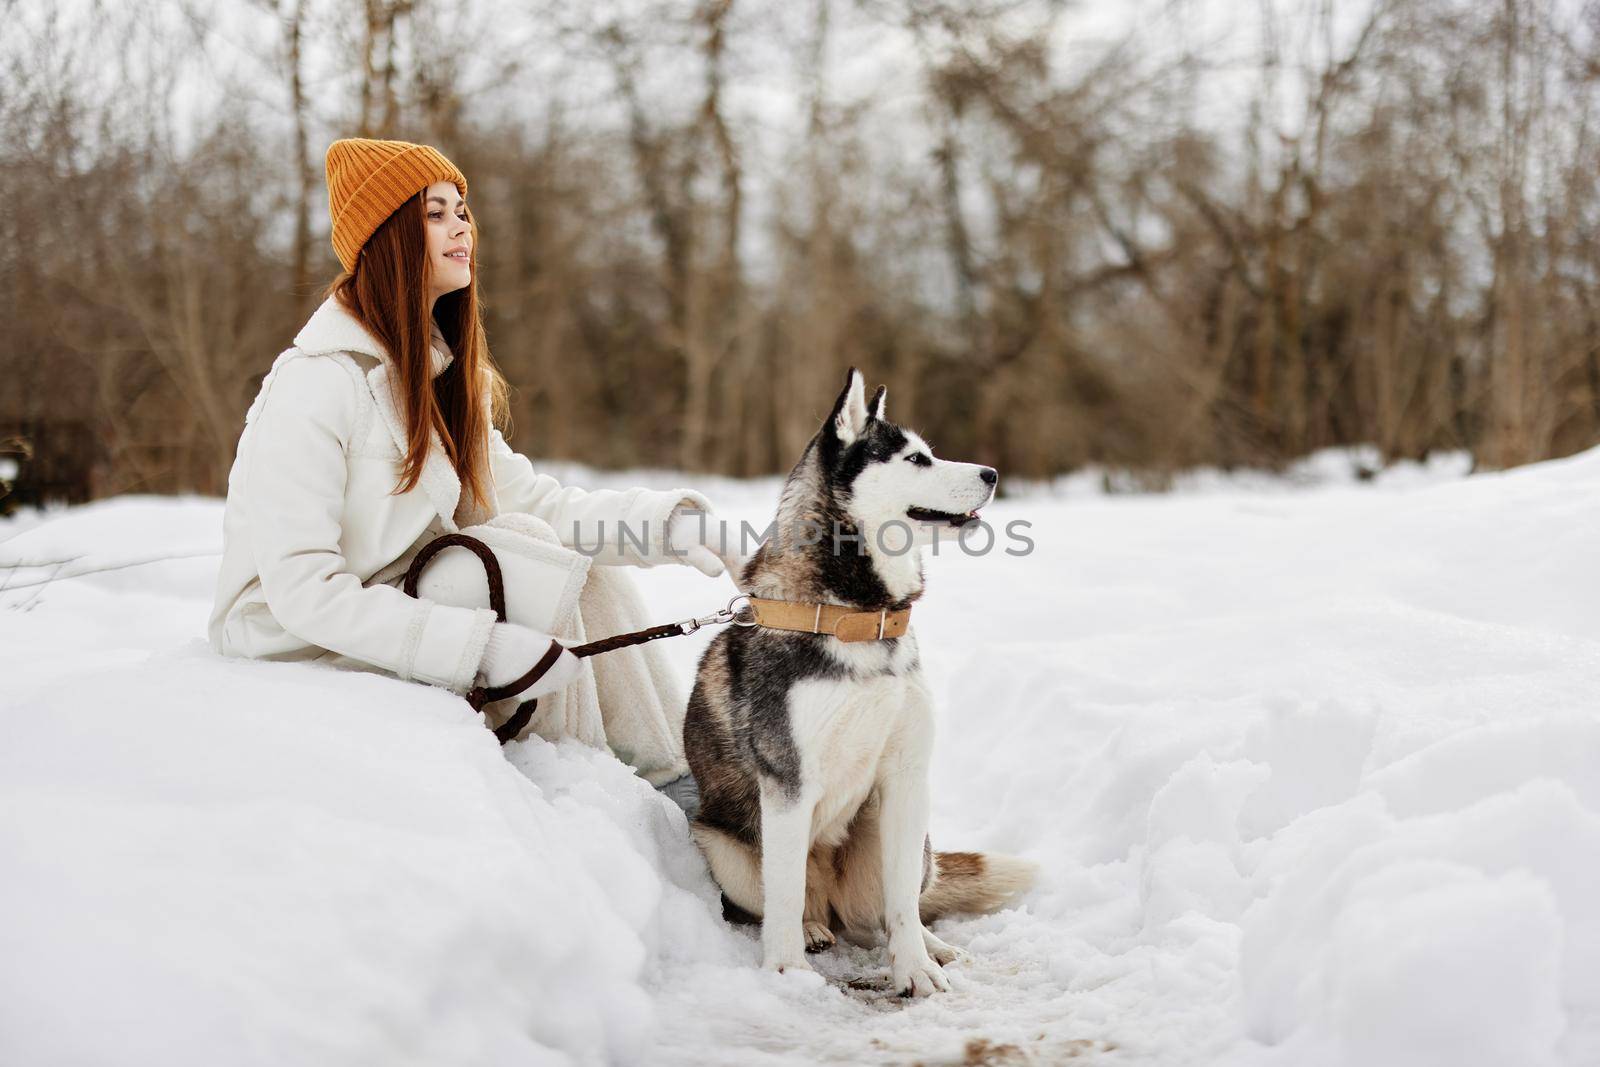 woman in the snow playing with a dog fun friendship winter holidays by SHOTPRIME